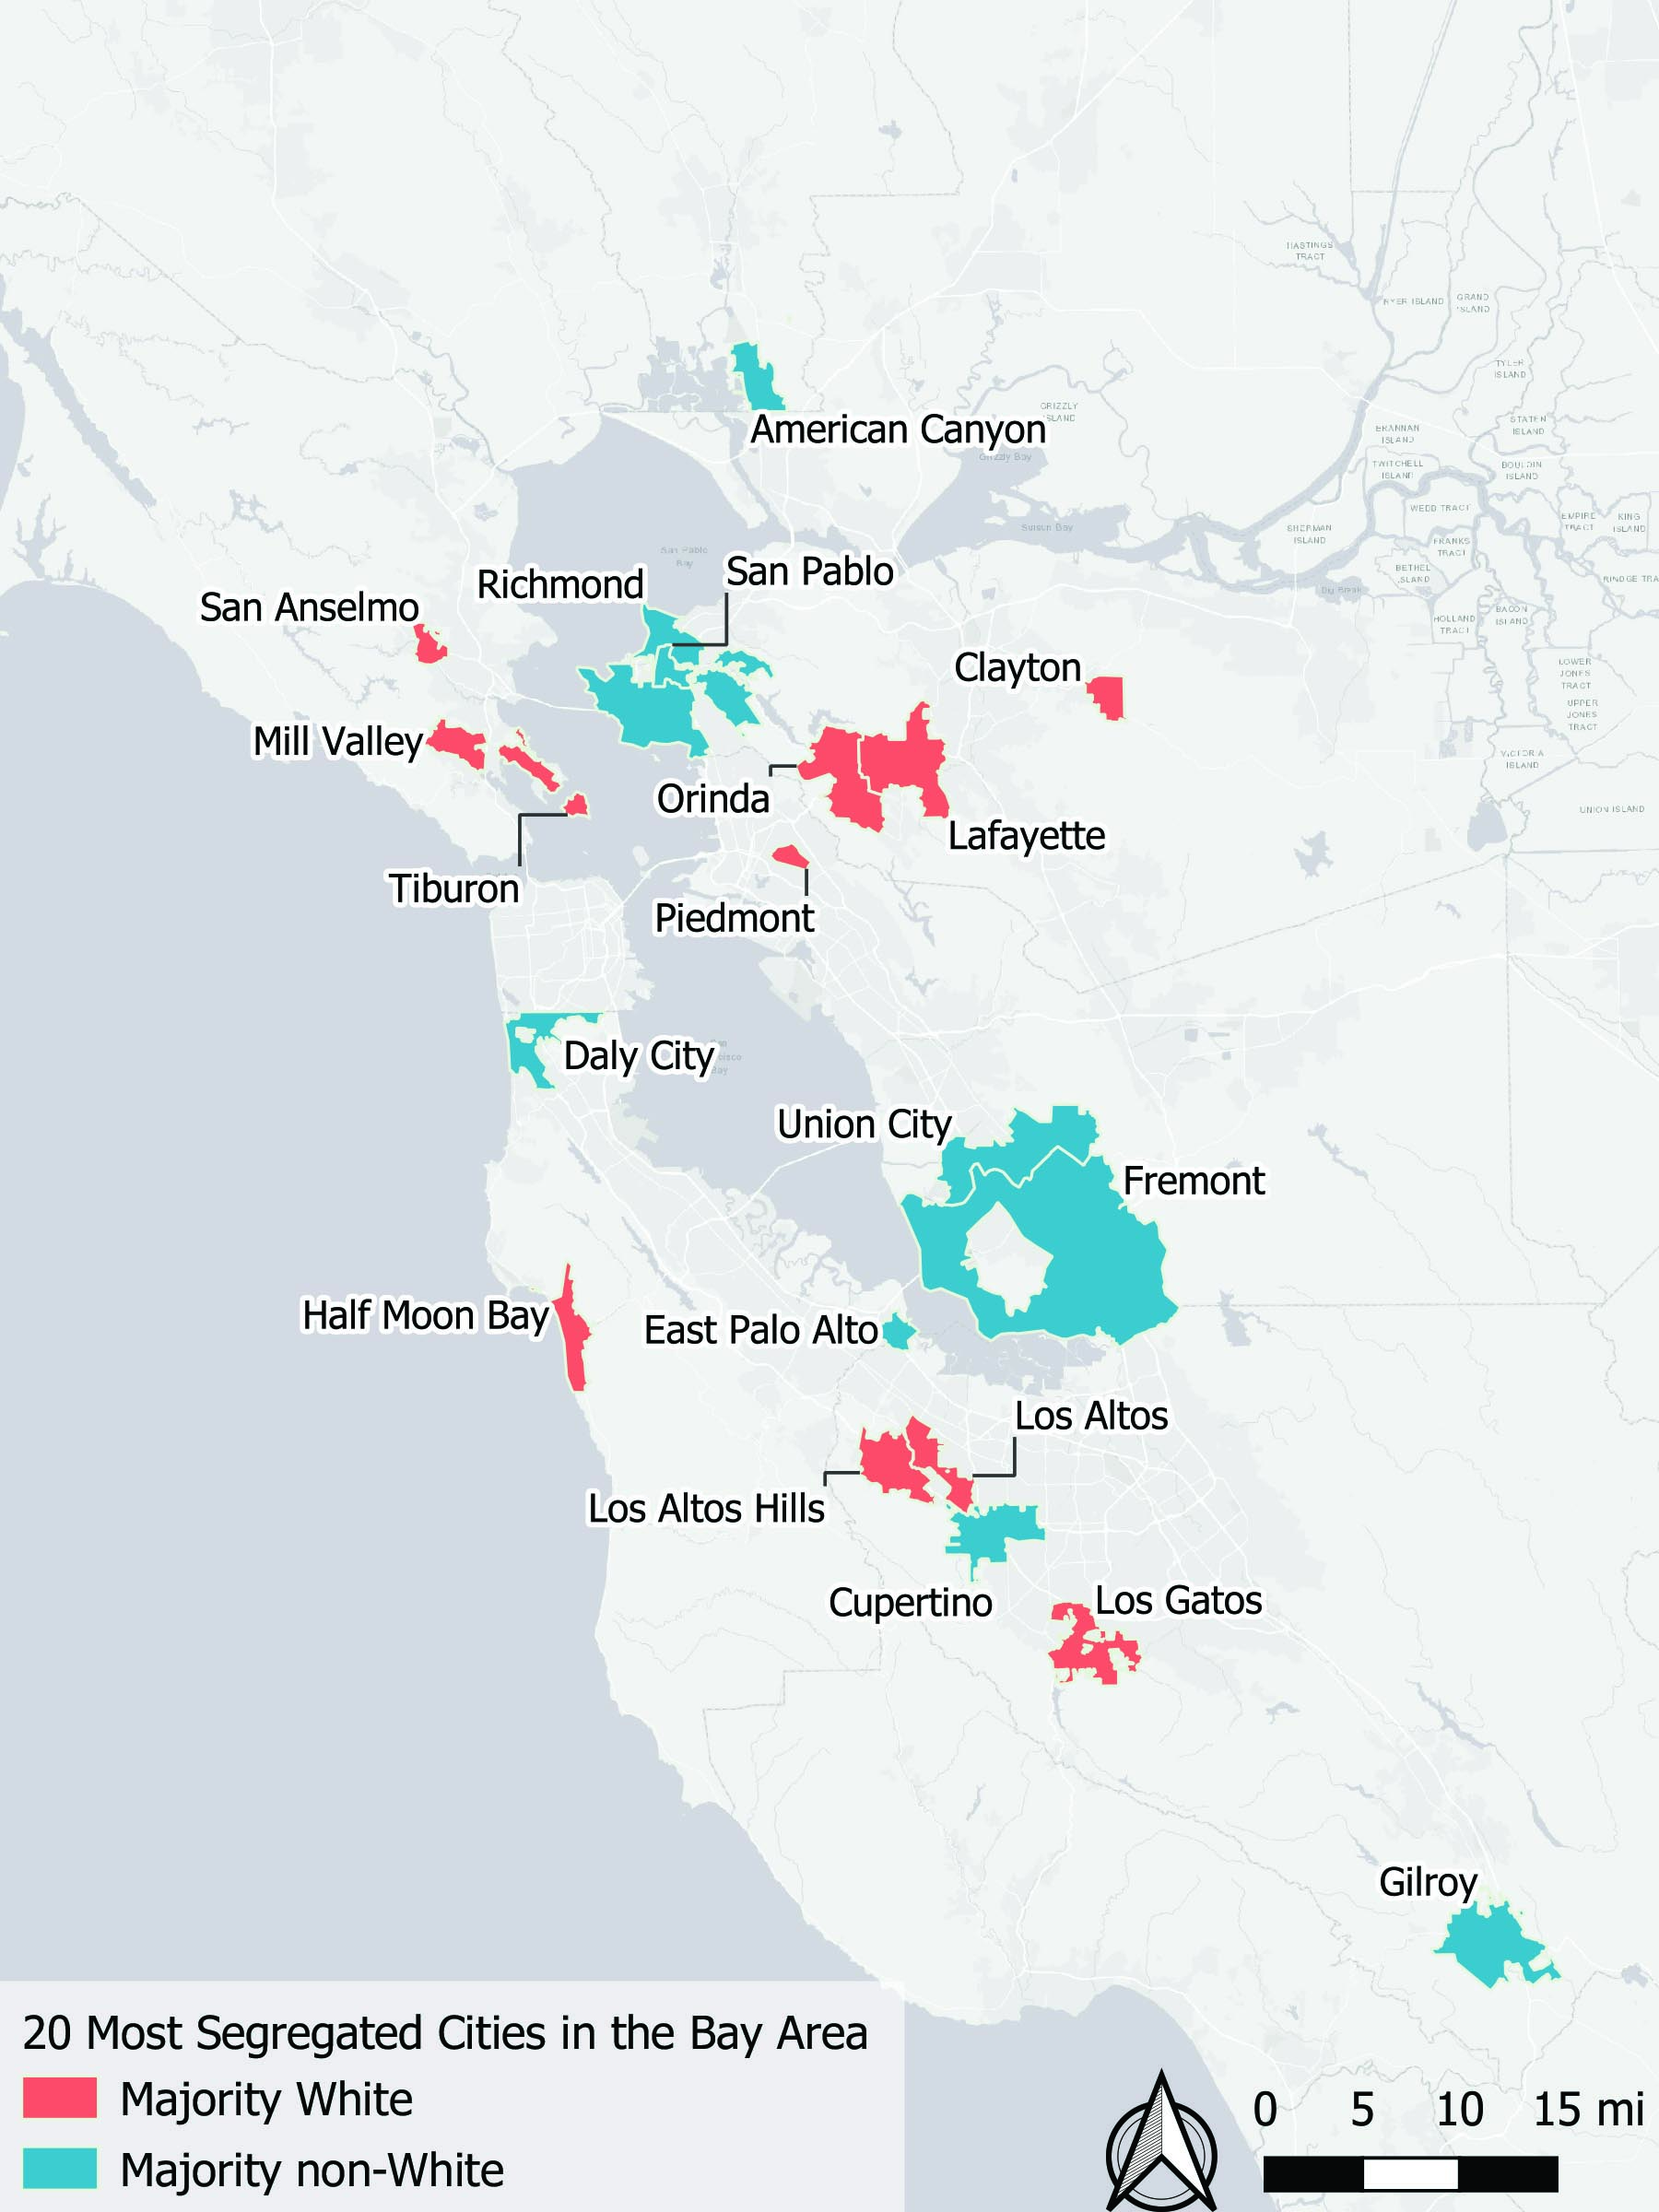 A map of the 20 most segregated cities in the Bay Area; among them are Richmond, Fremont, Los Gatos, and Half Moon Bay